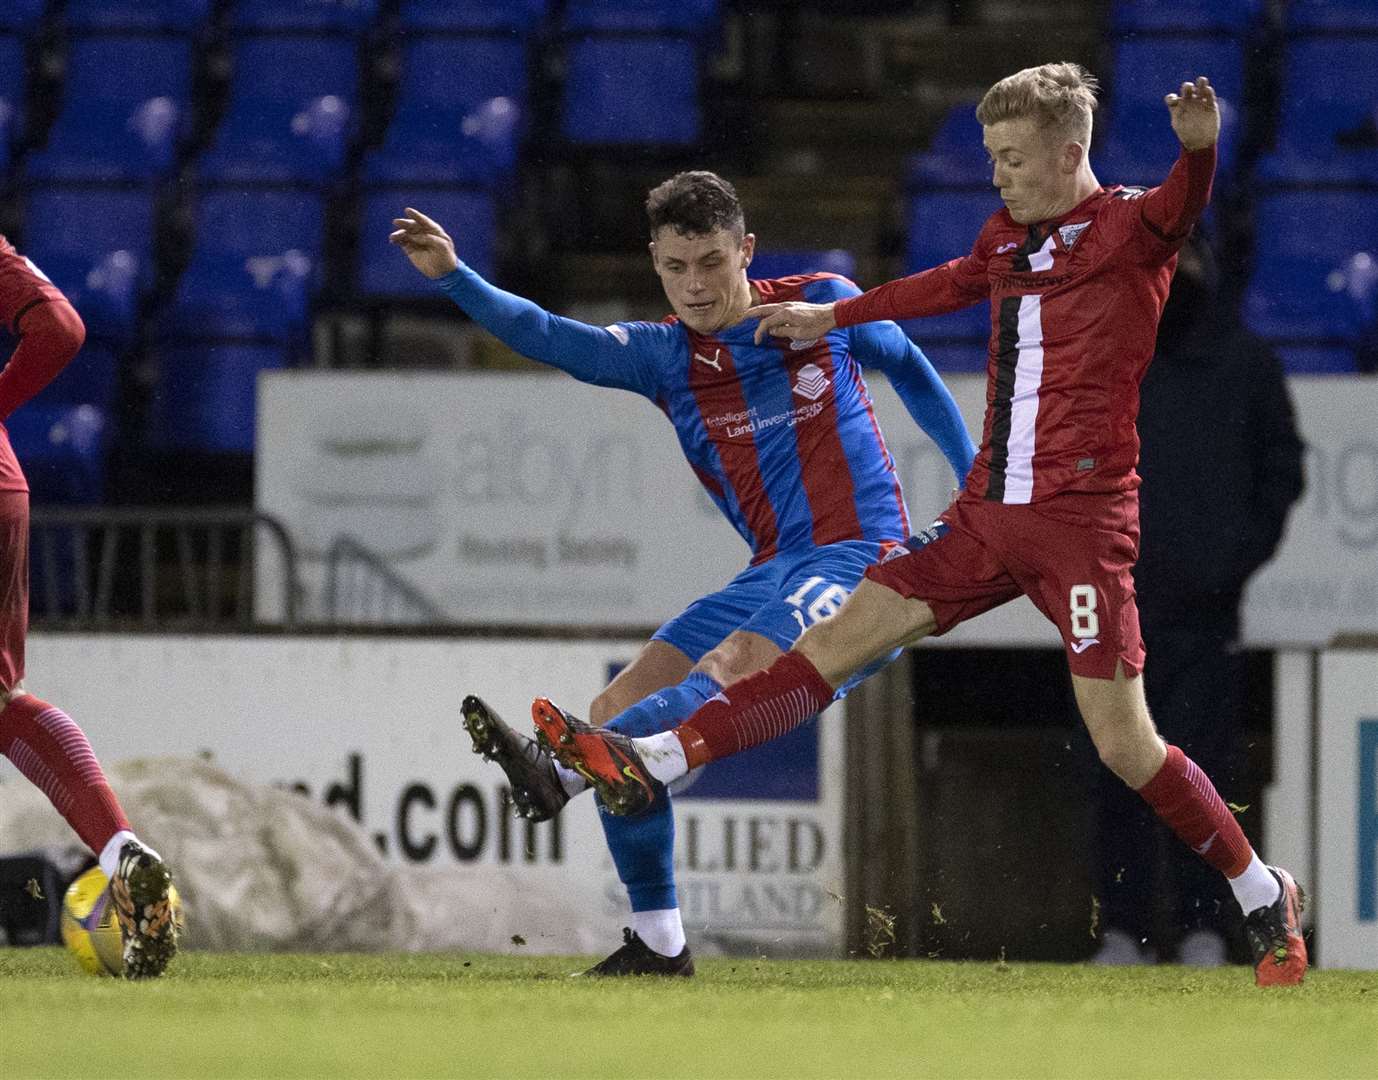 Picture - Ken Macpherson, Inverness. Inverness CT(1) v Dunfermline(1). 29.12.20. ICT’s Cameron Harper clears off the toes of Dunfermline's Kyle Turner.